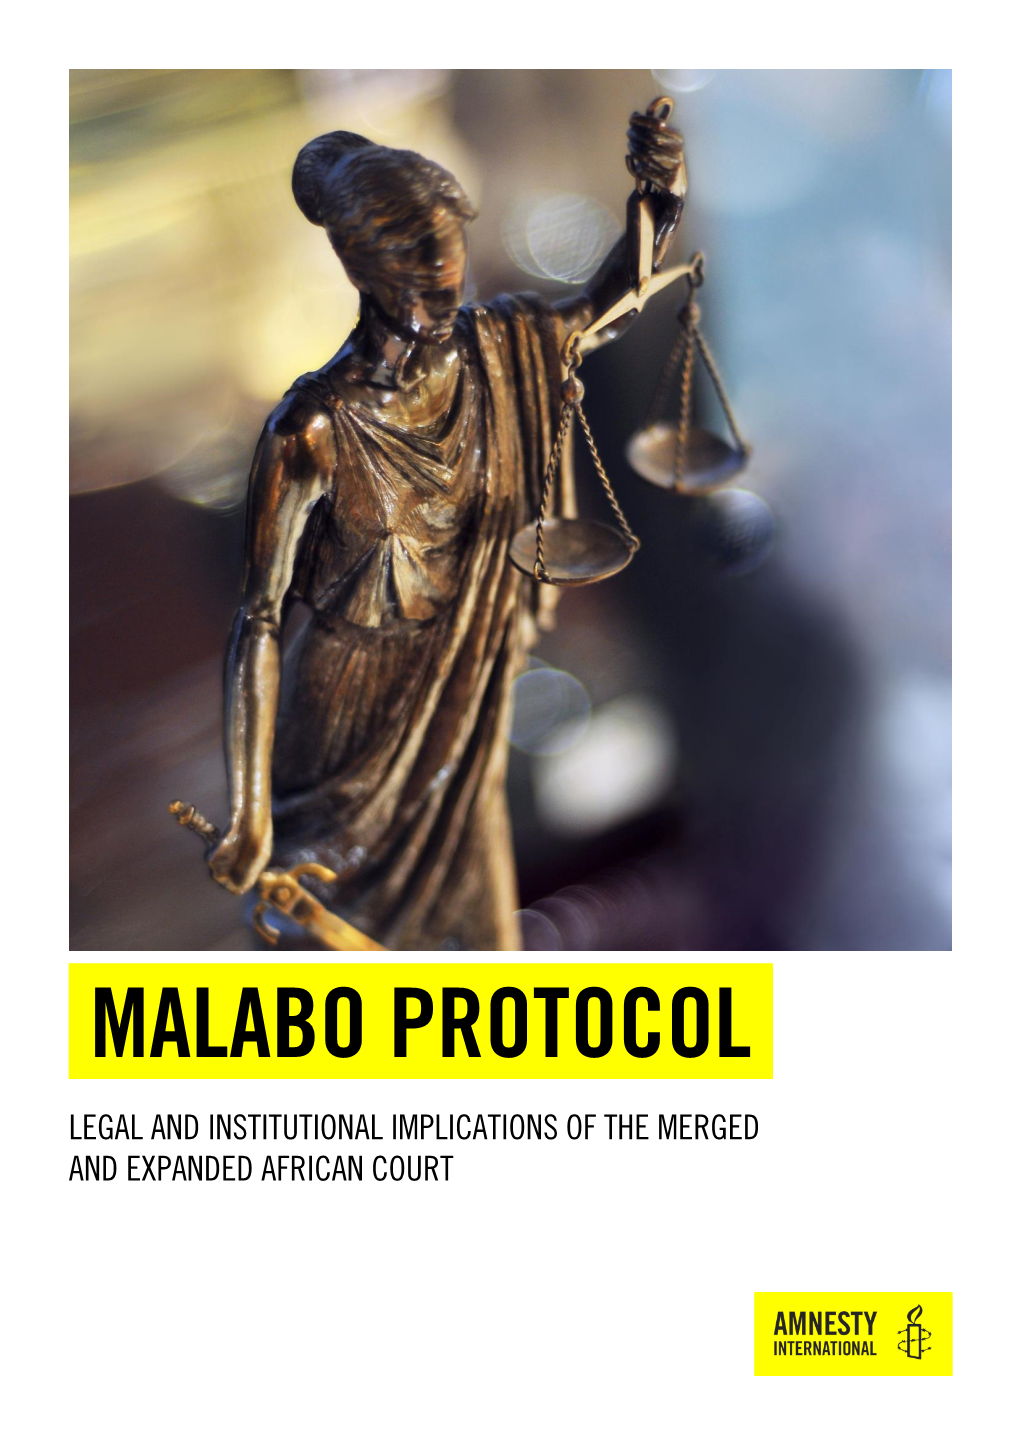 Malabo Protocol: Legal and Institutional Implications of the Merged and Expanded African Court